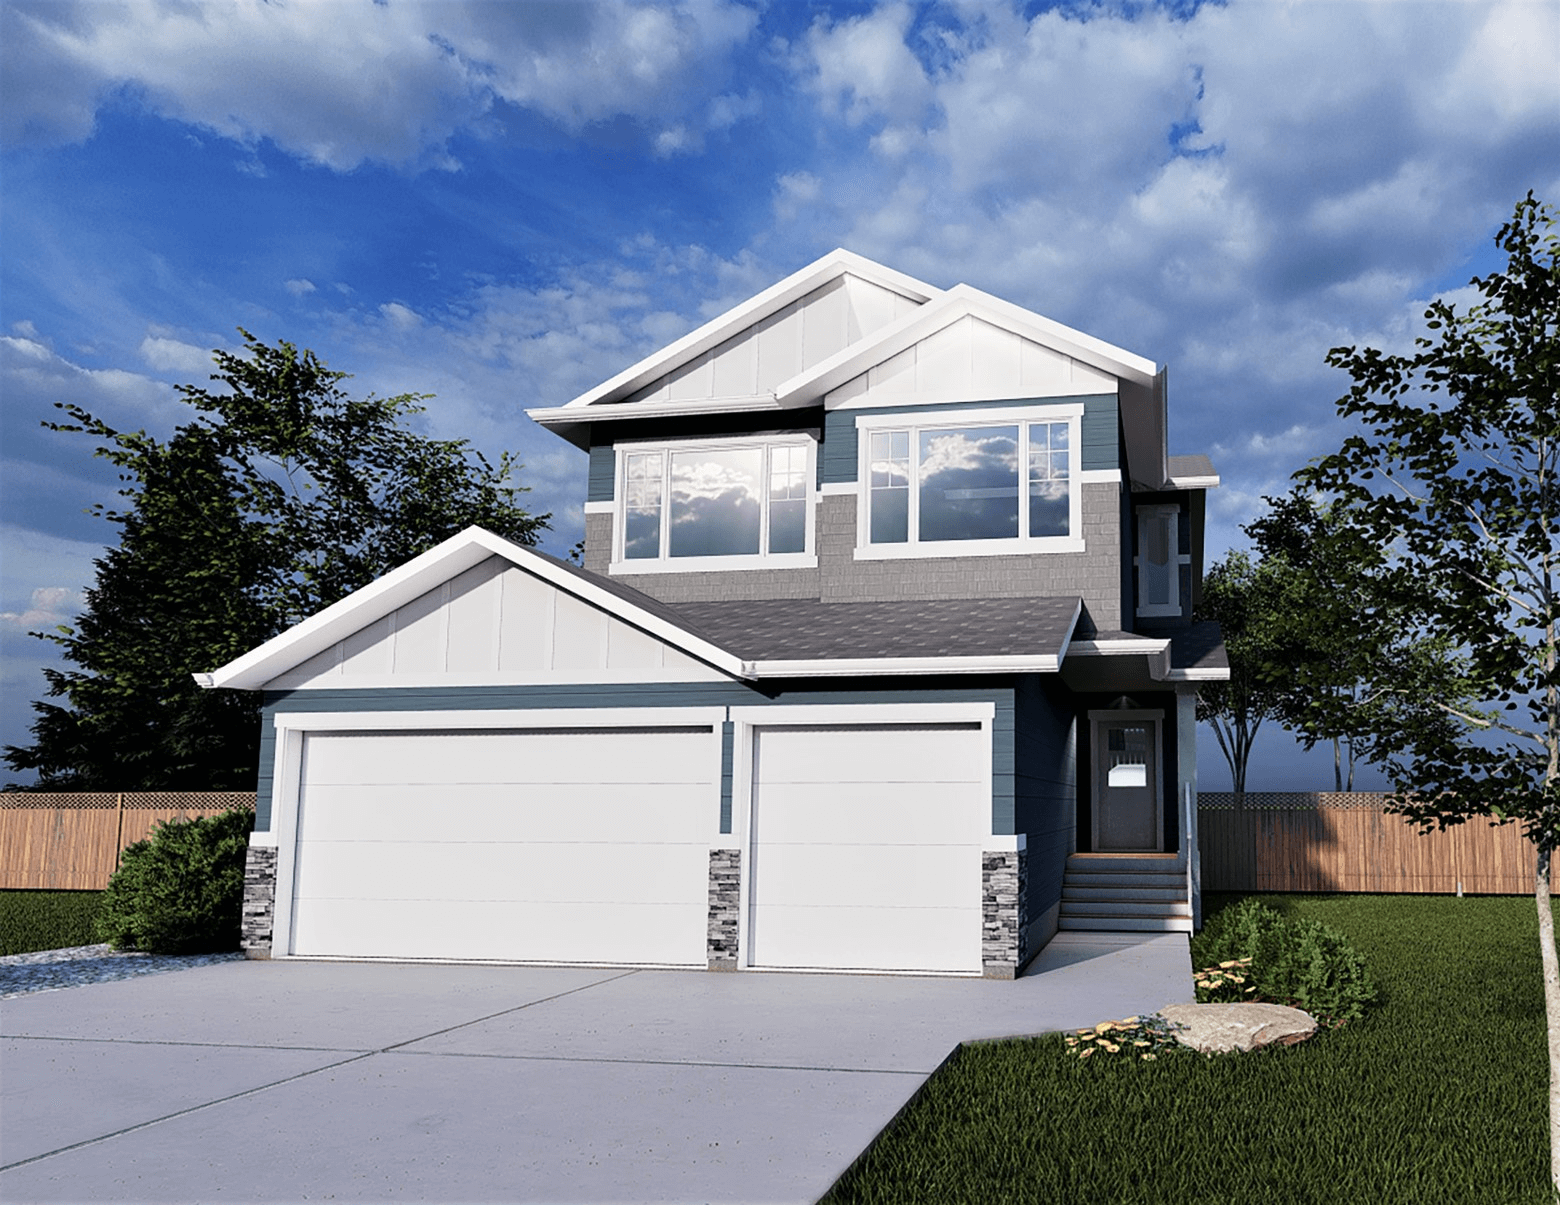 Addison Rendering - Show home